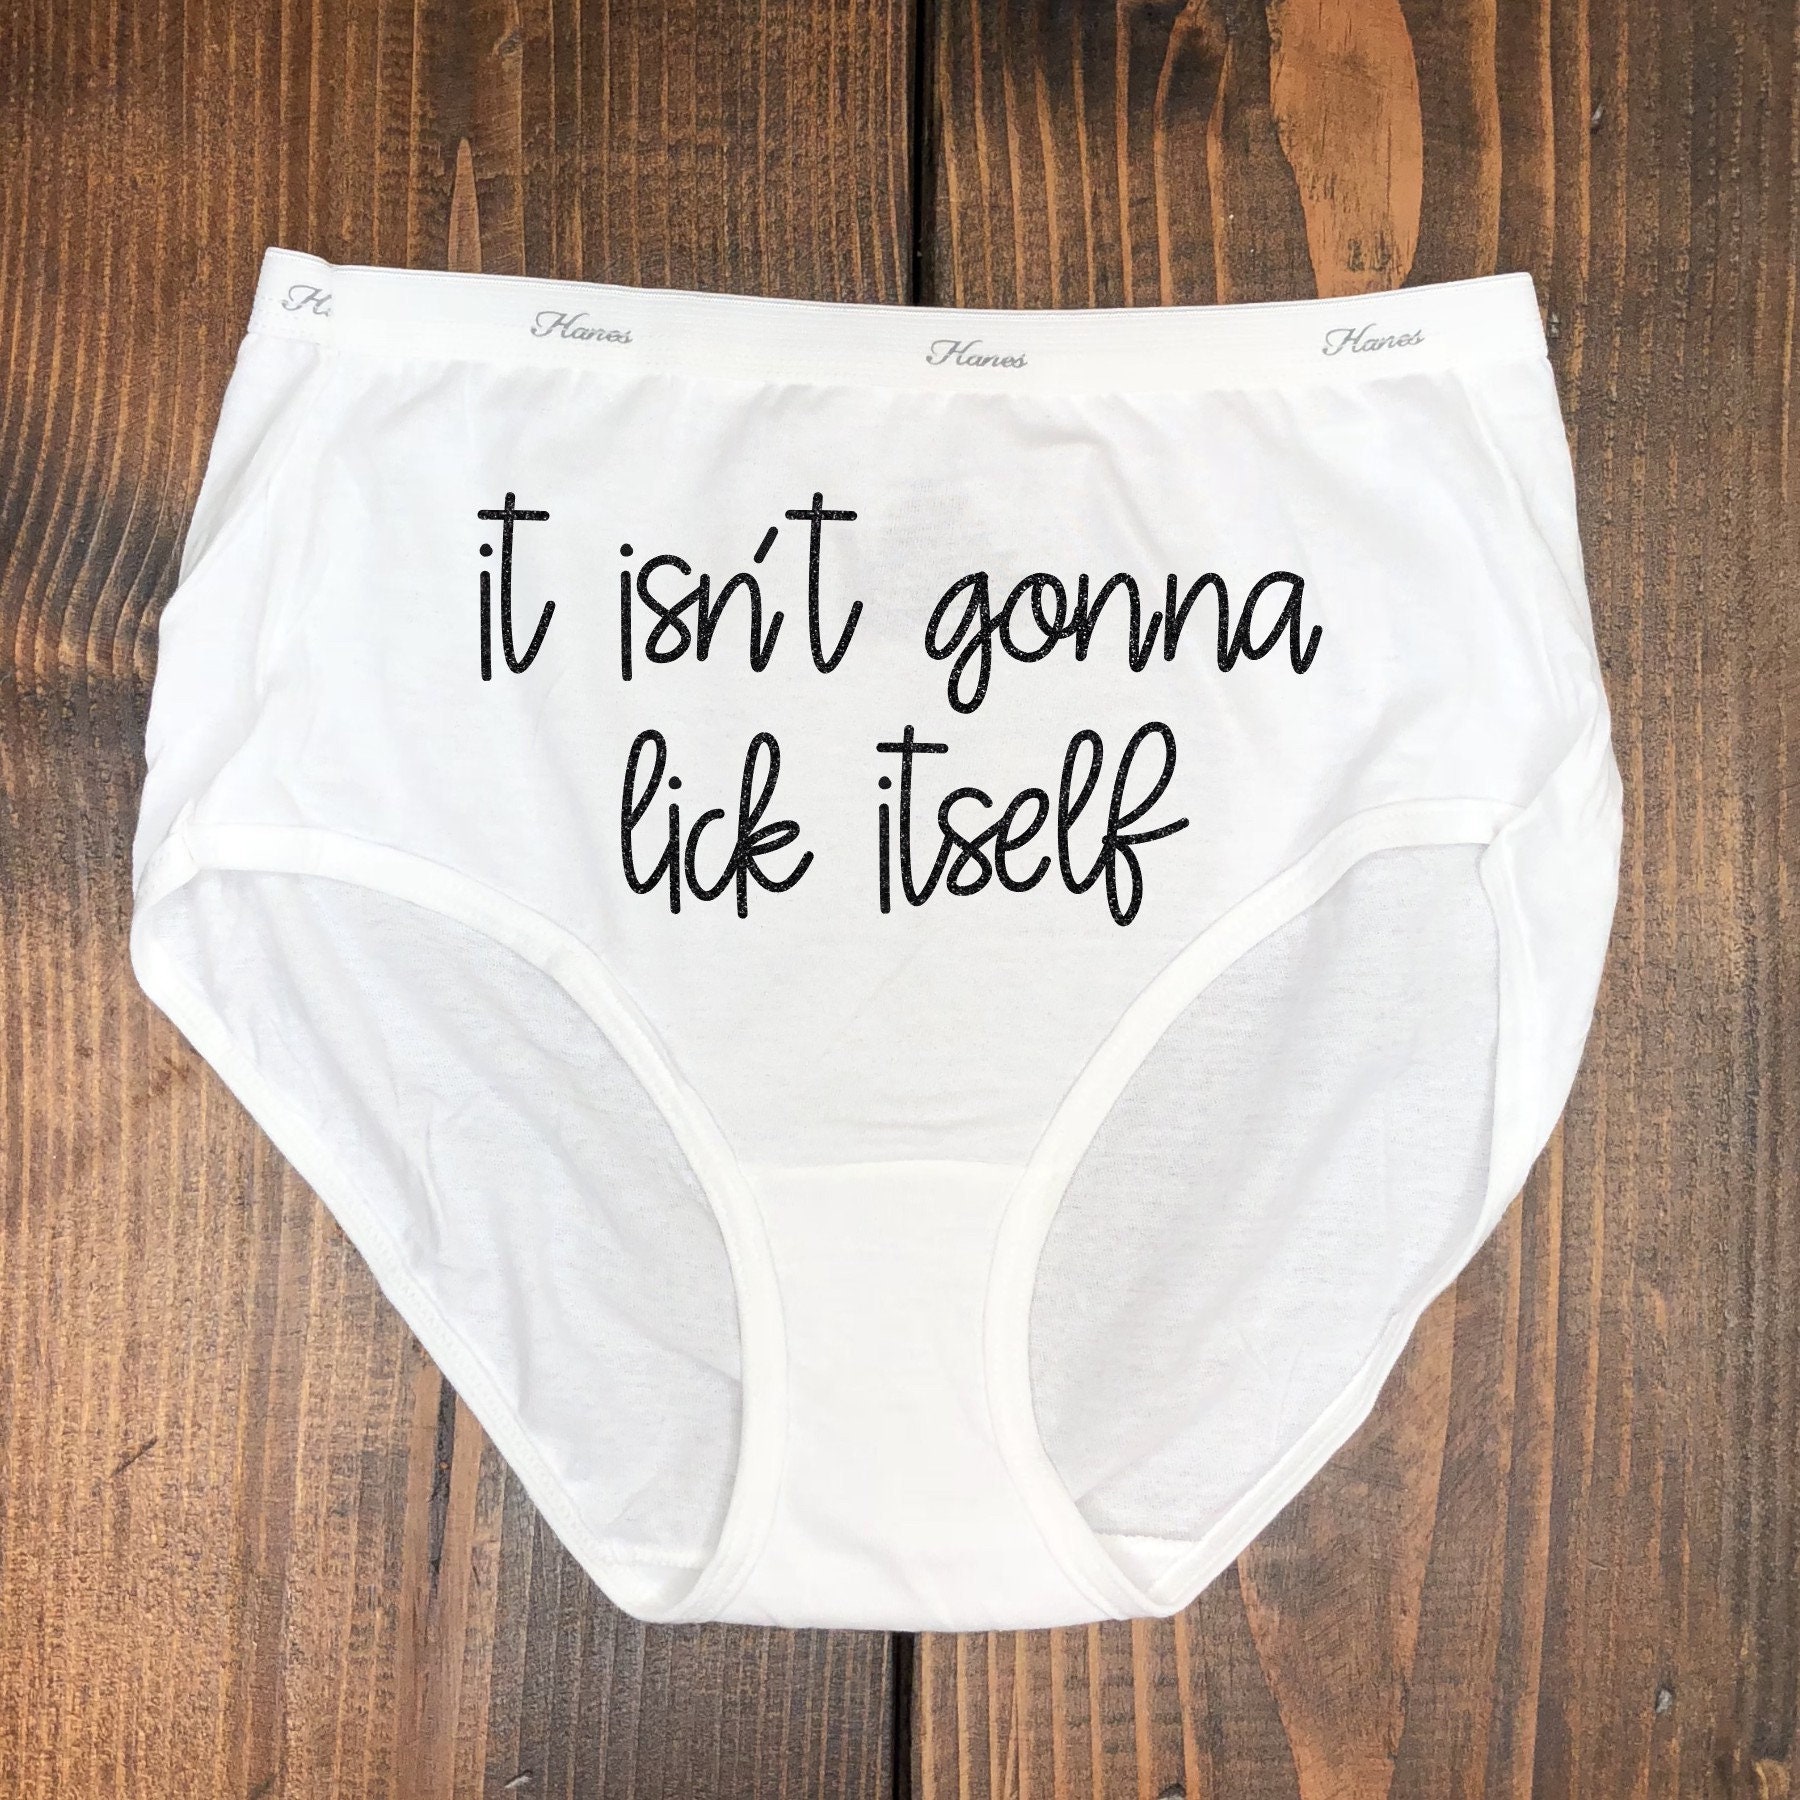 Never Mind Granny Panties, Gag Gift Exchange, Bachelorette Party